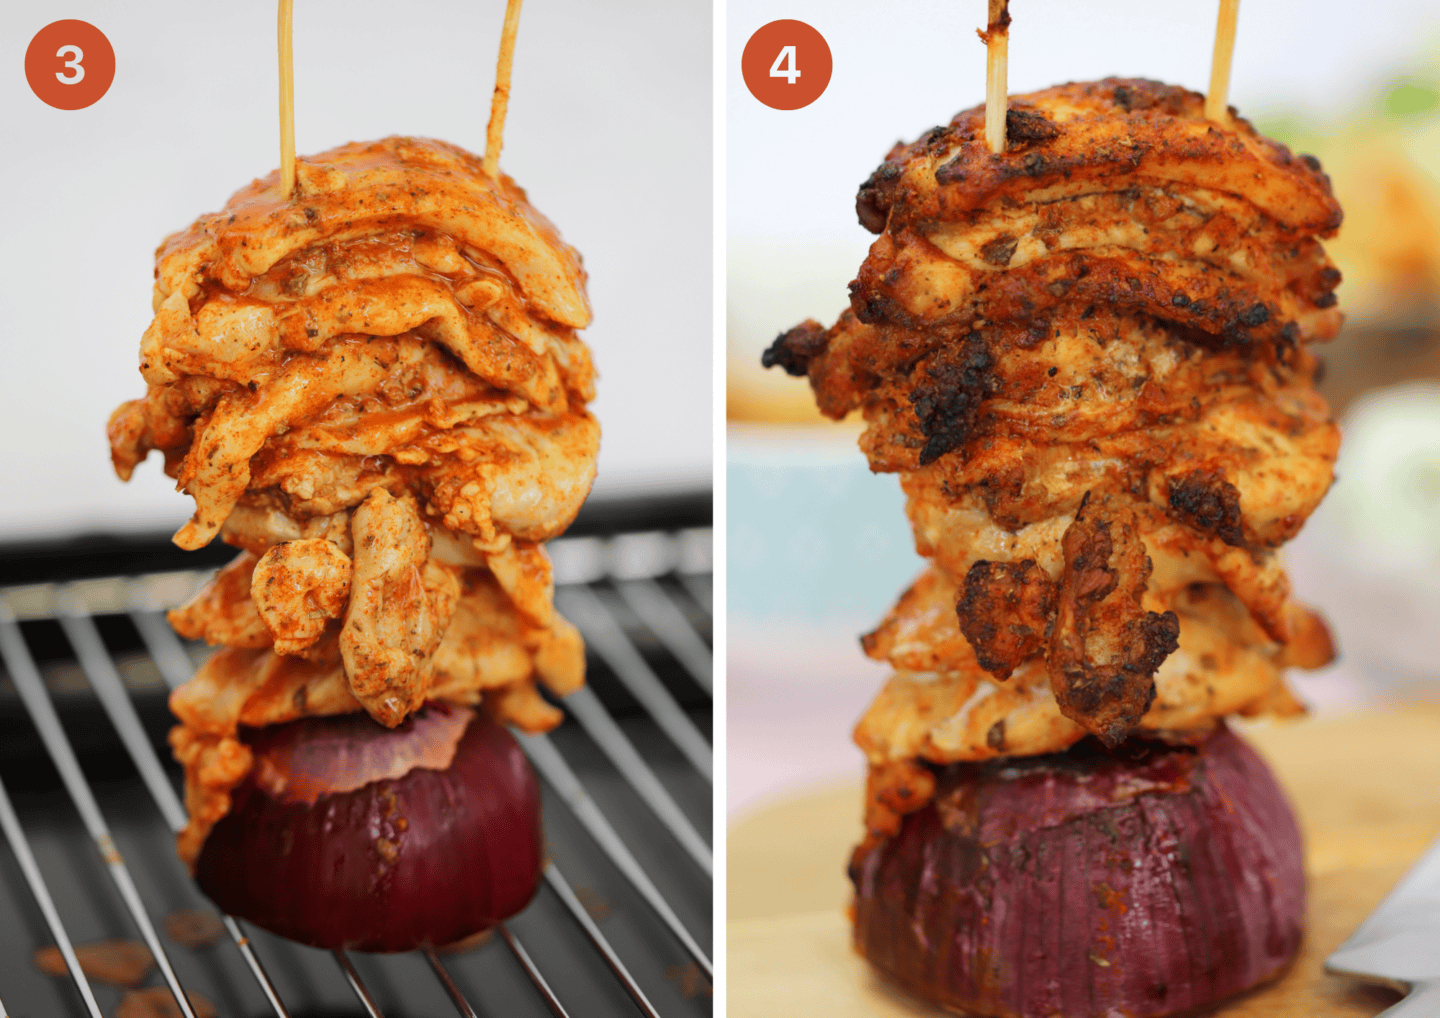 The chicken gyro meat threaded on a skewer, before and after cooking.